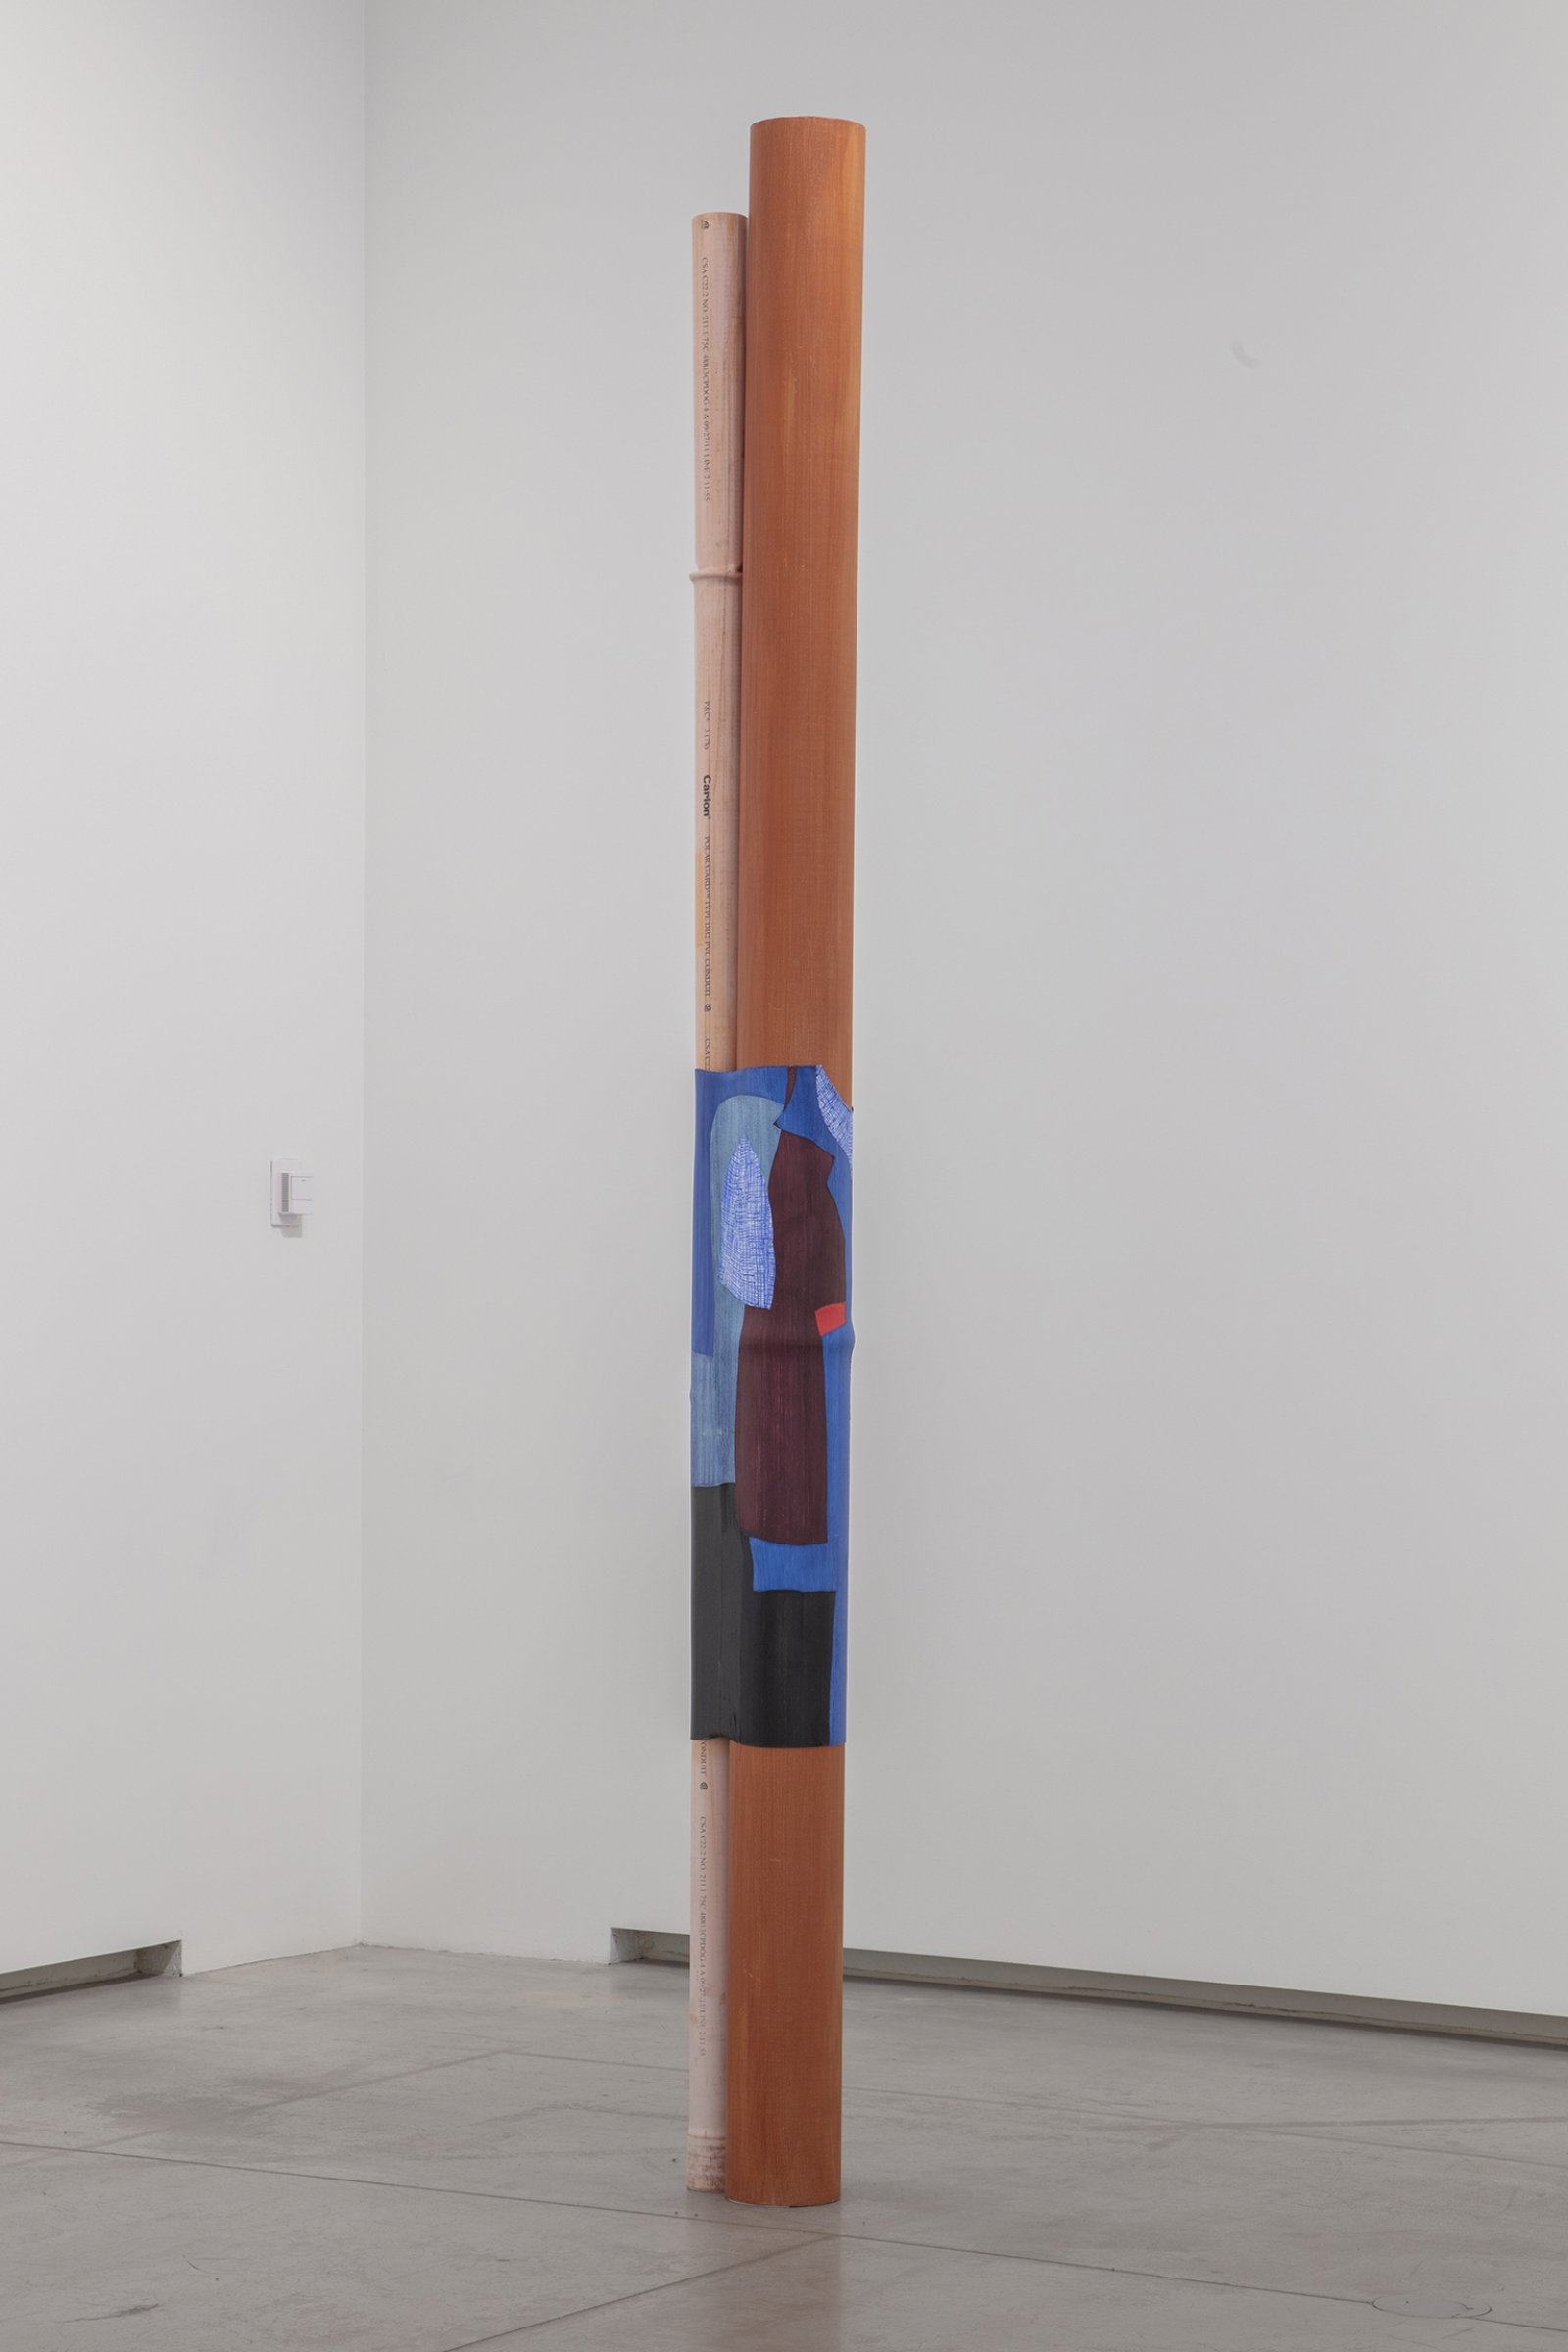 Valérie Blass, So what are your skills?, 2019, pvc pipes, heat-shrink tubing, paint, copper, inkjet print on polyester, 40 x 11 x 12 in. (100 x 27 x 30 cm), 11 x 9 x 1 in. (28 x 23 x 3 cm). Installation view, Le parlement des invisibles, Art Gallery of Ontario, Toronto, Canada, 2019